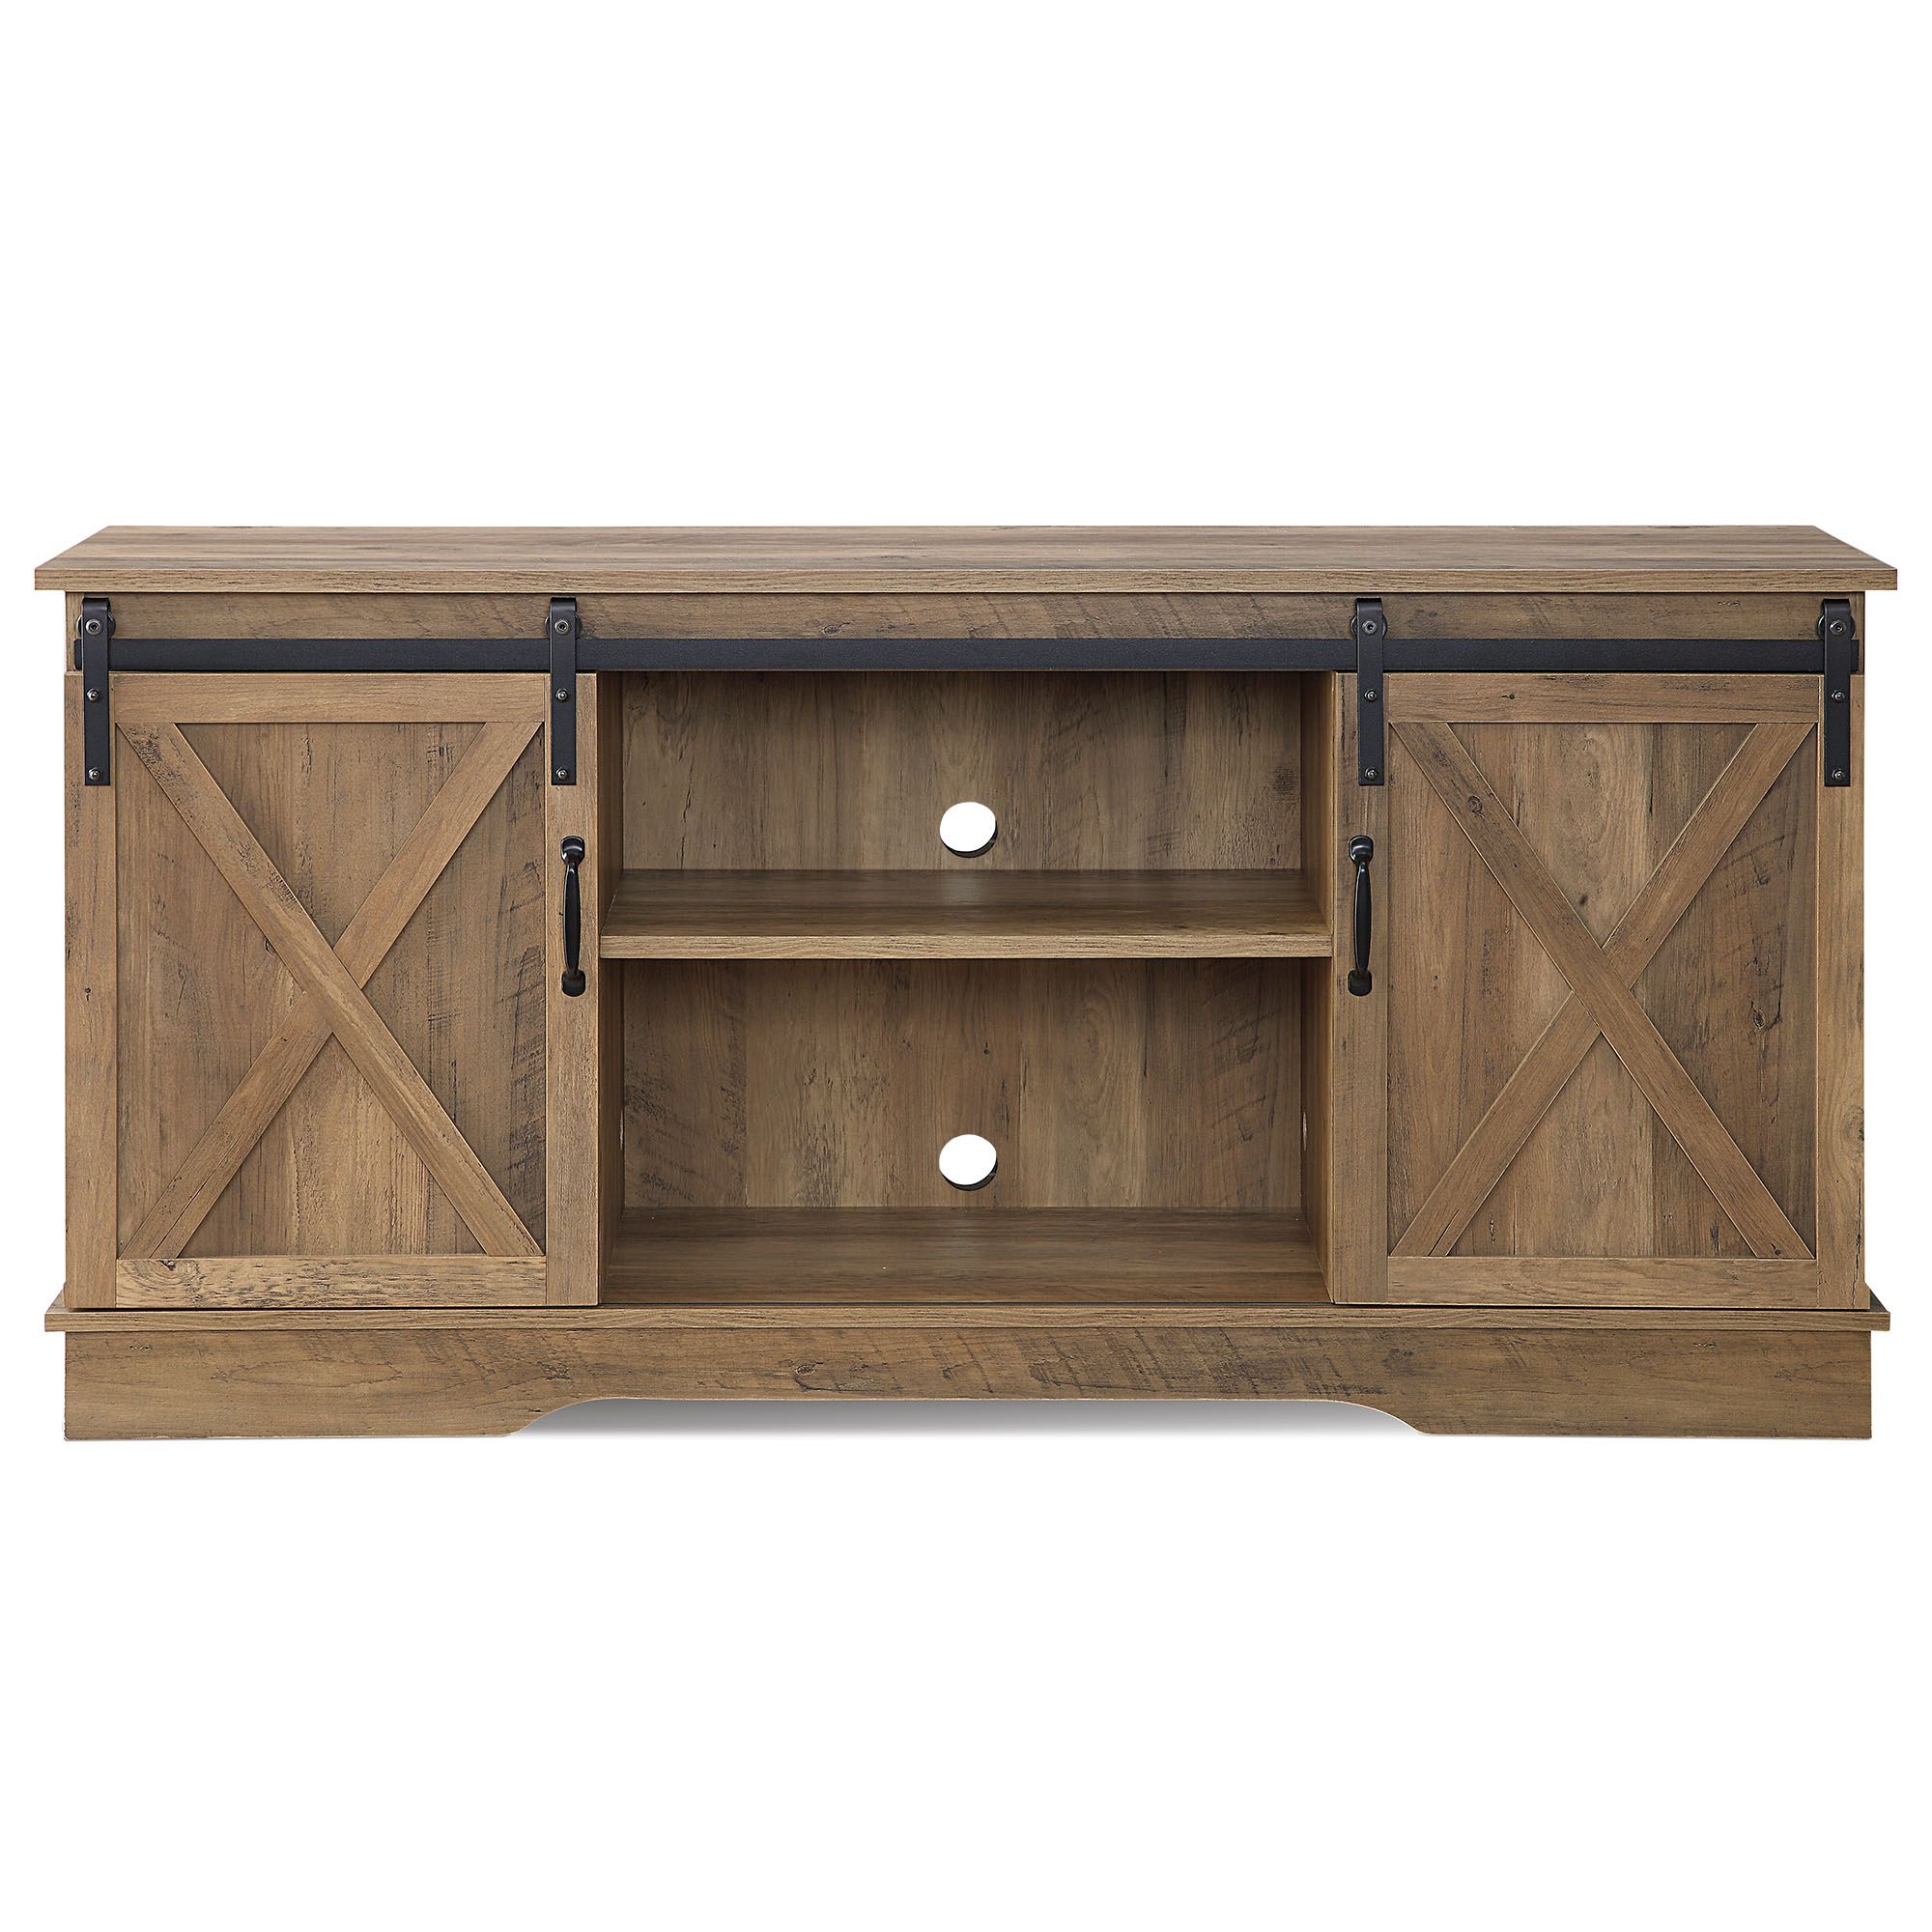 Favorite 58"farmhouse Tv Stand W/sliding Door Console Table For Tvs For Tv Stands With Sliding Barn Door Console In Rustic Oak (View 4 of 10)